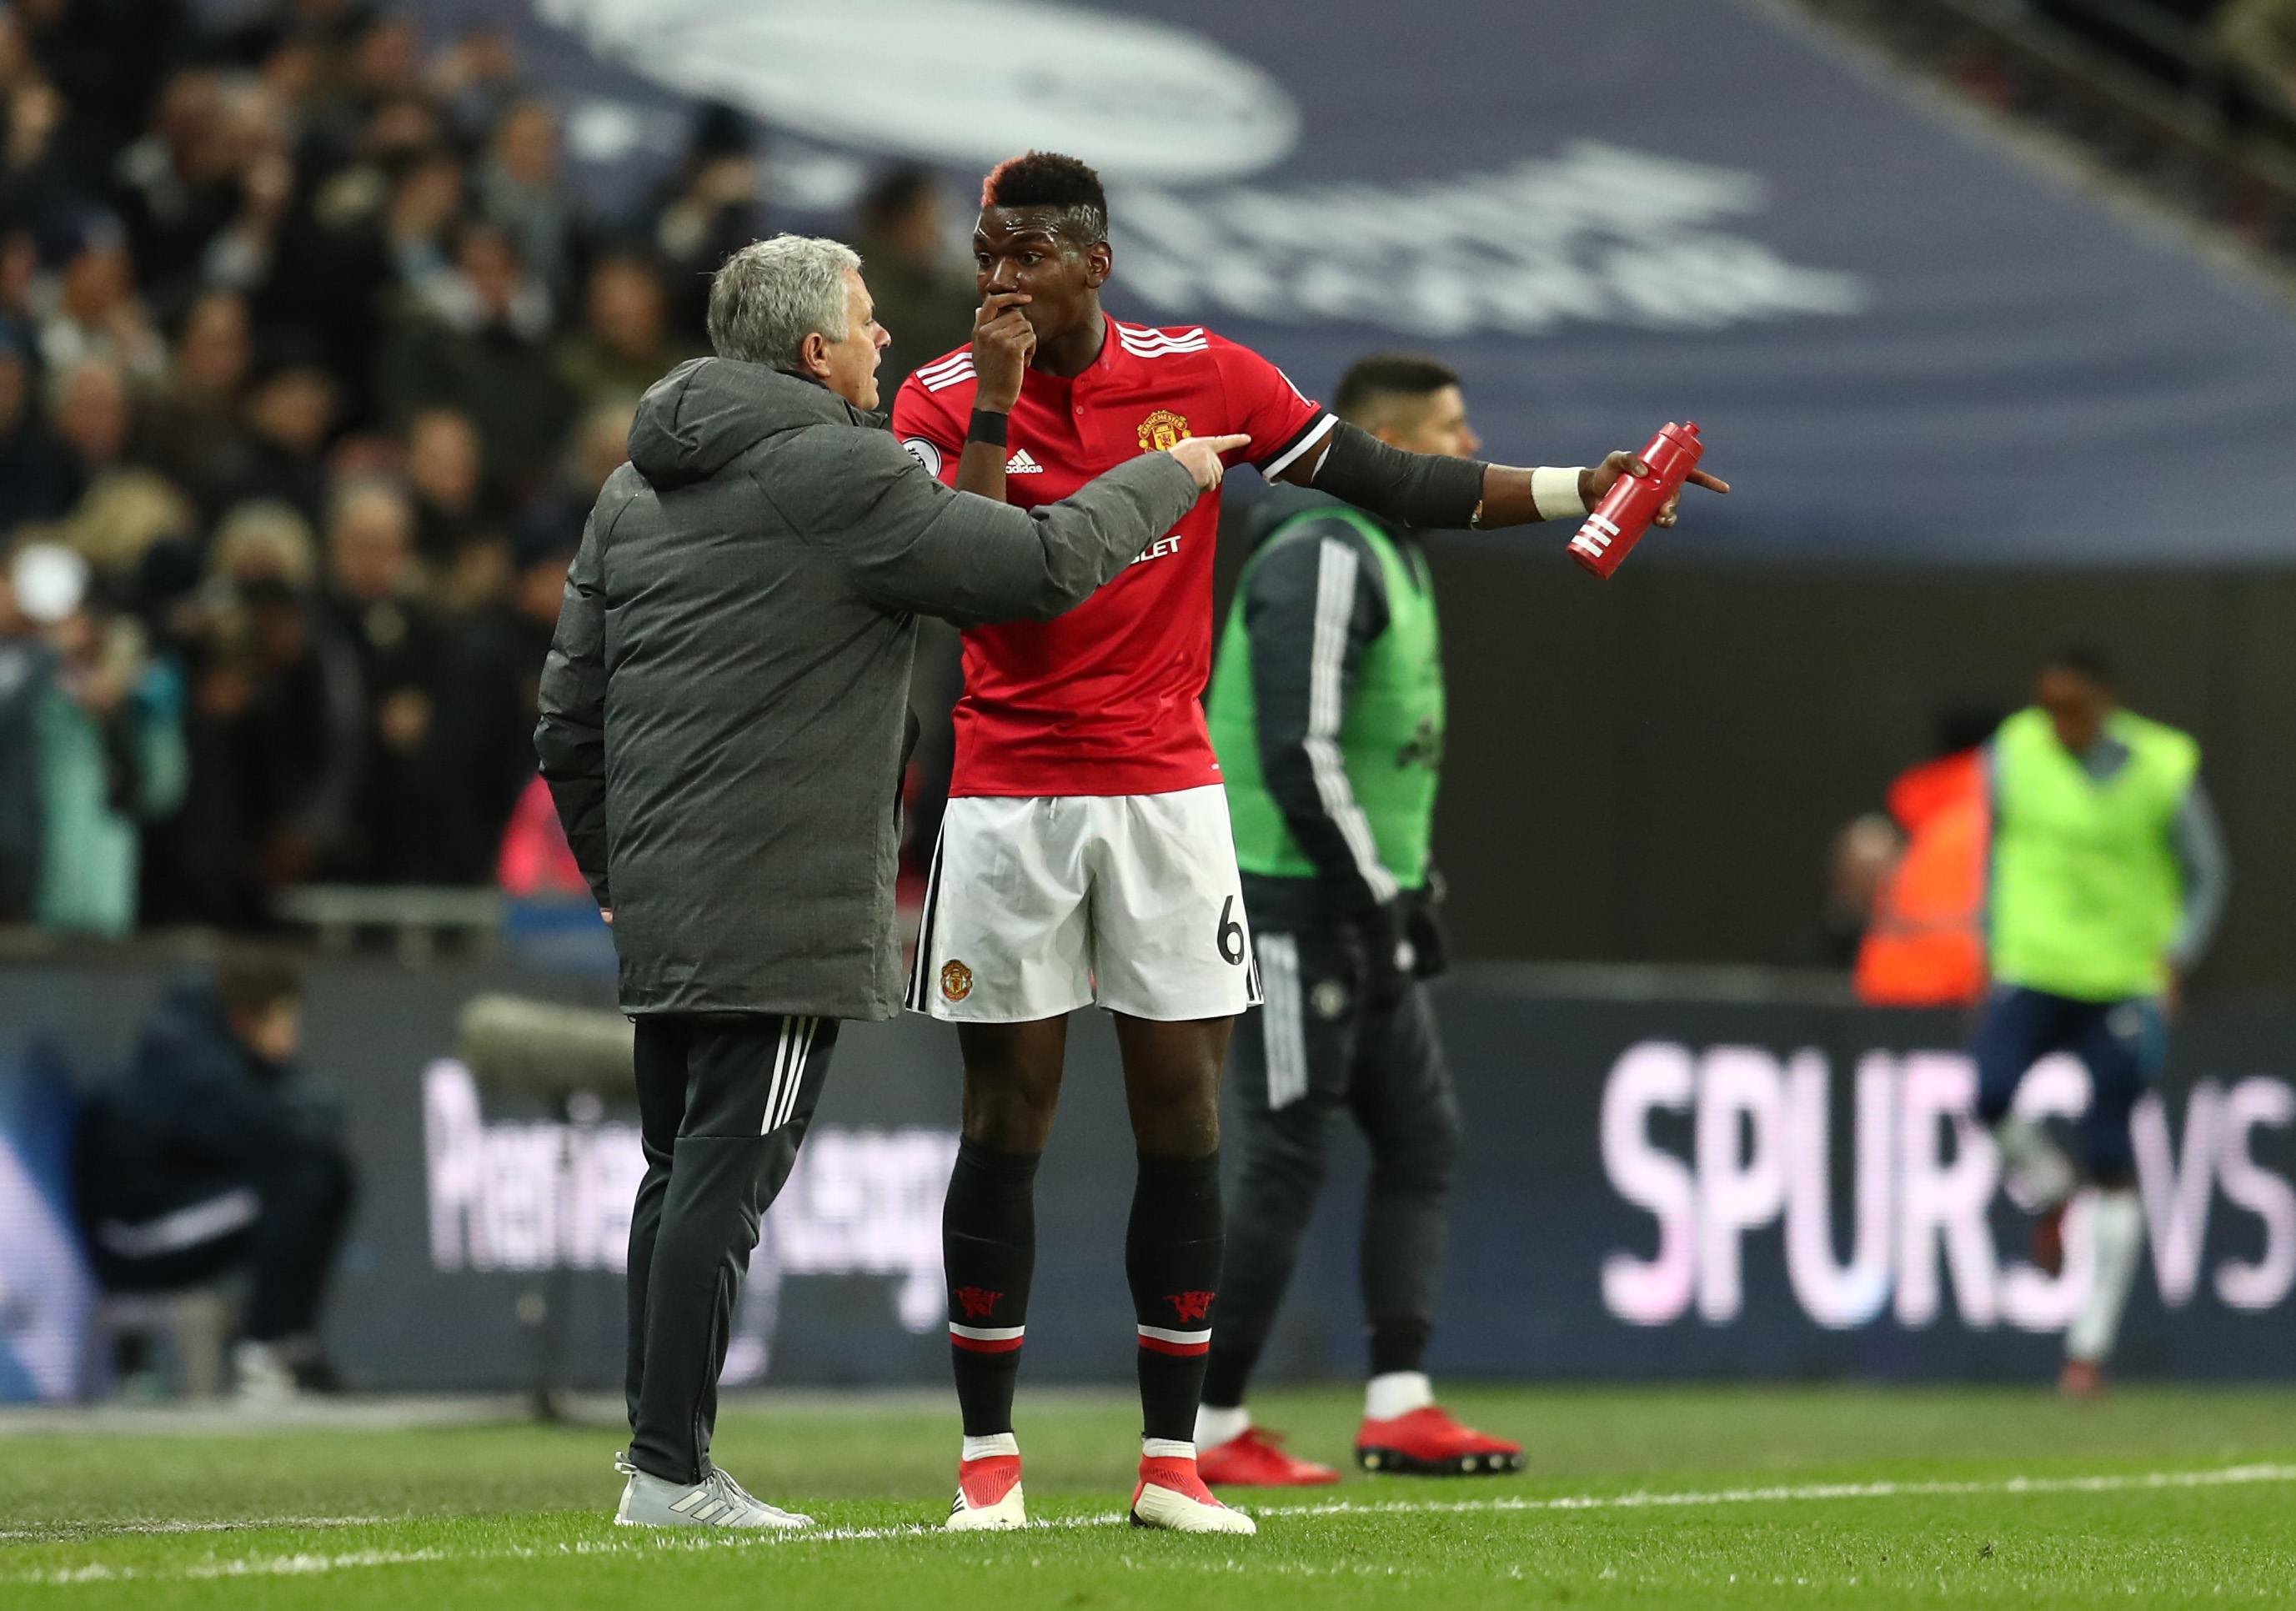 Mourinho has a history of clashing with players. Could the cards typically fall if a similar scenario occurs at Tottenham? (Photo by Catherine Ivill/Getty Images)